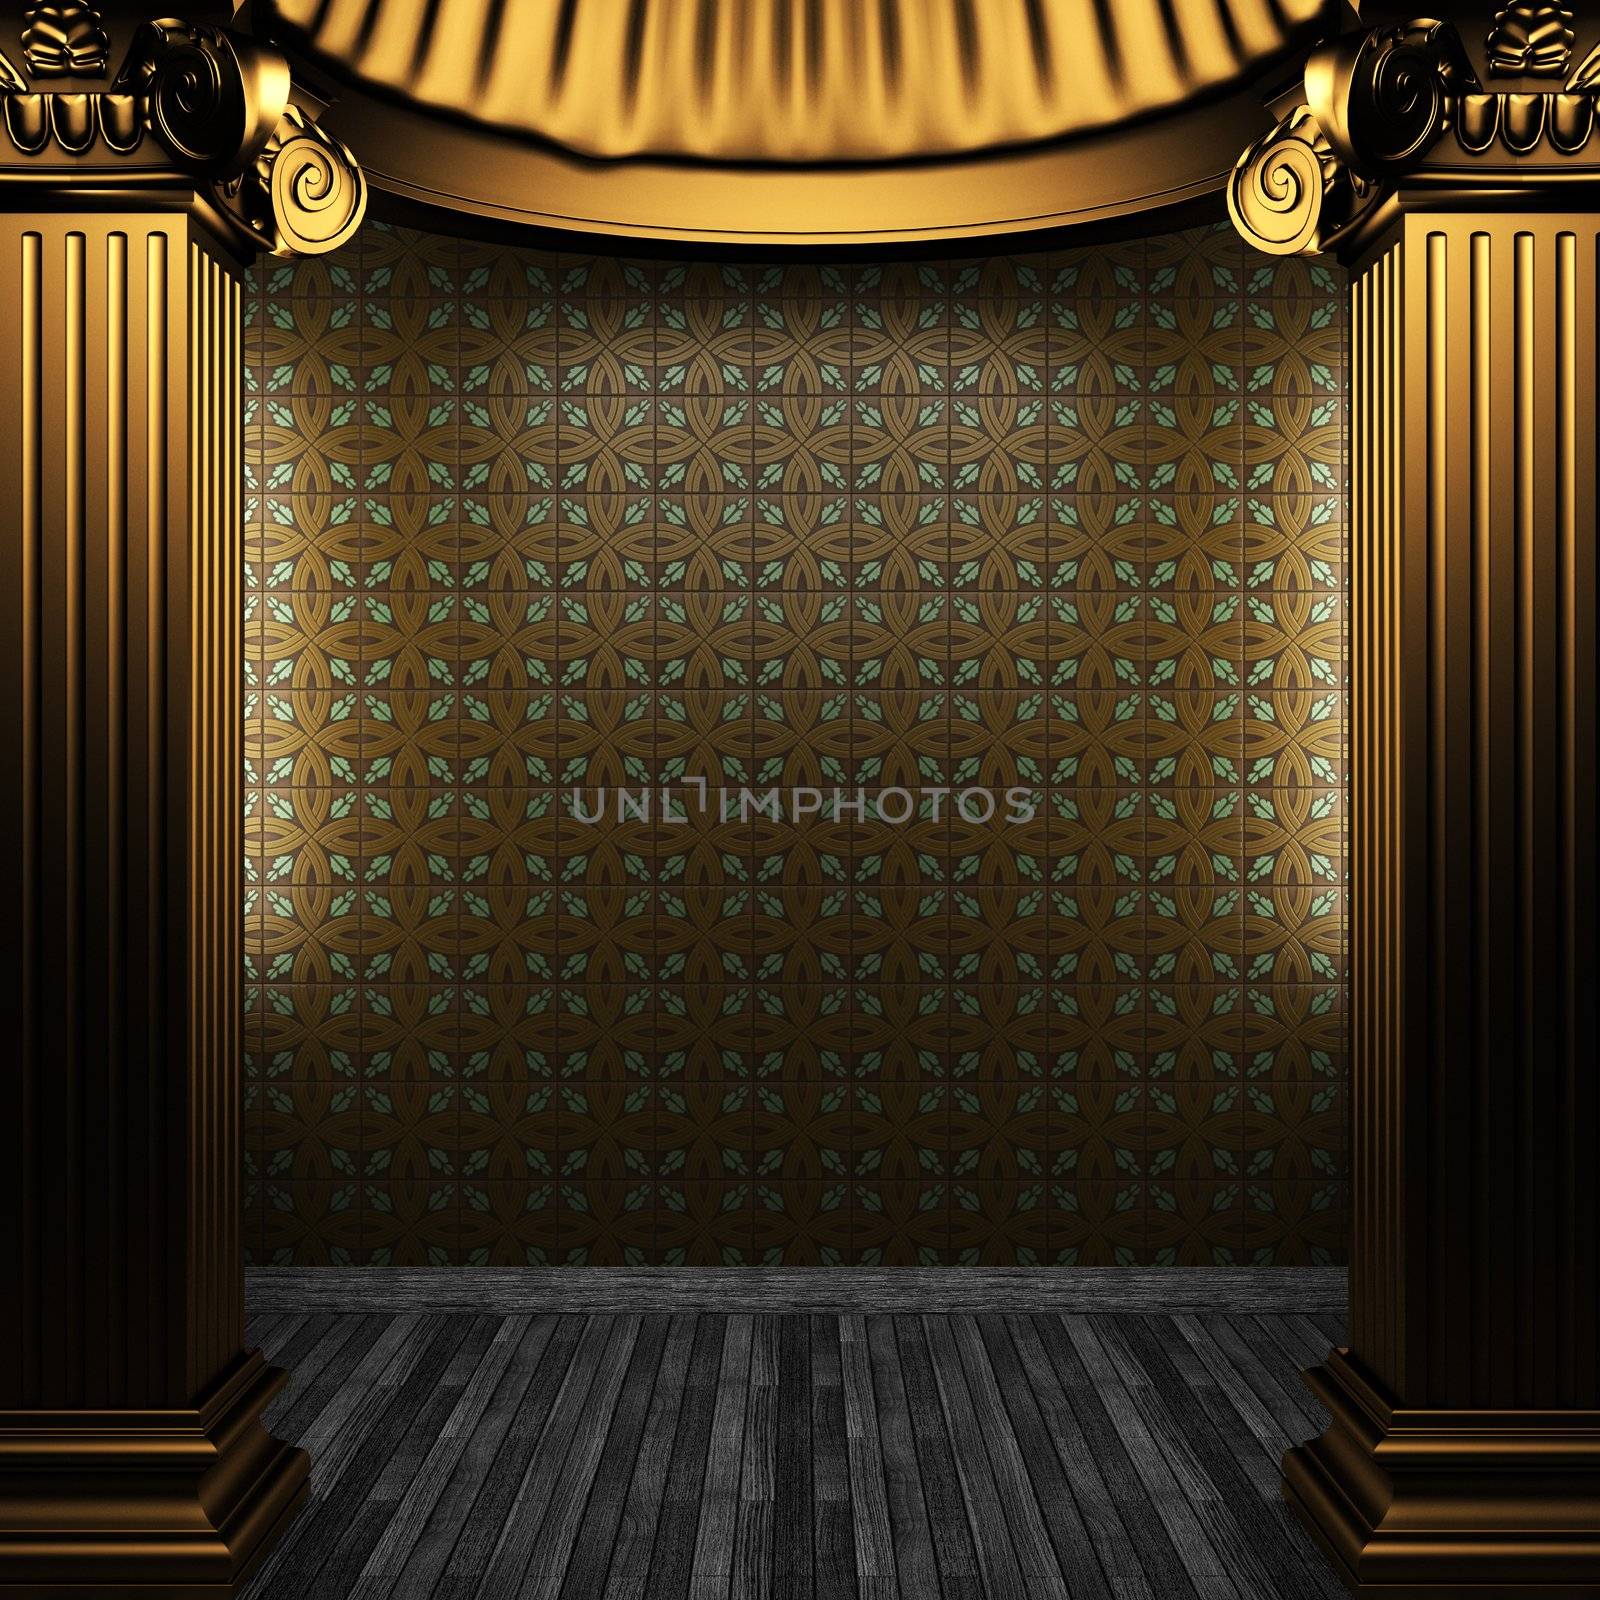 bronze columns and tile wall made in 3D